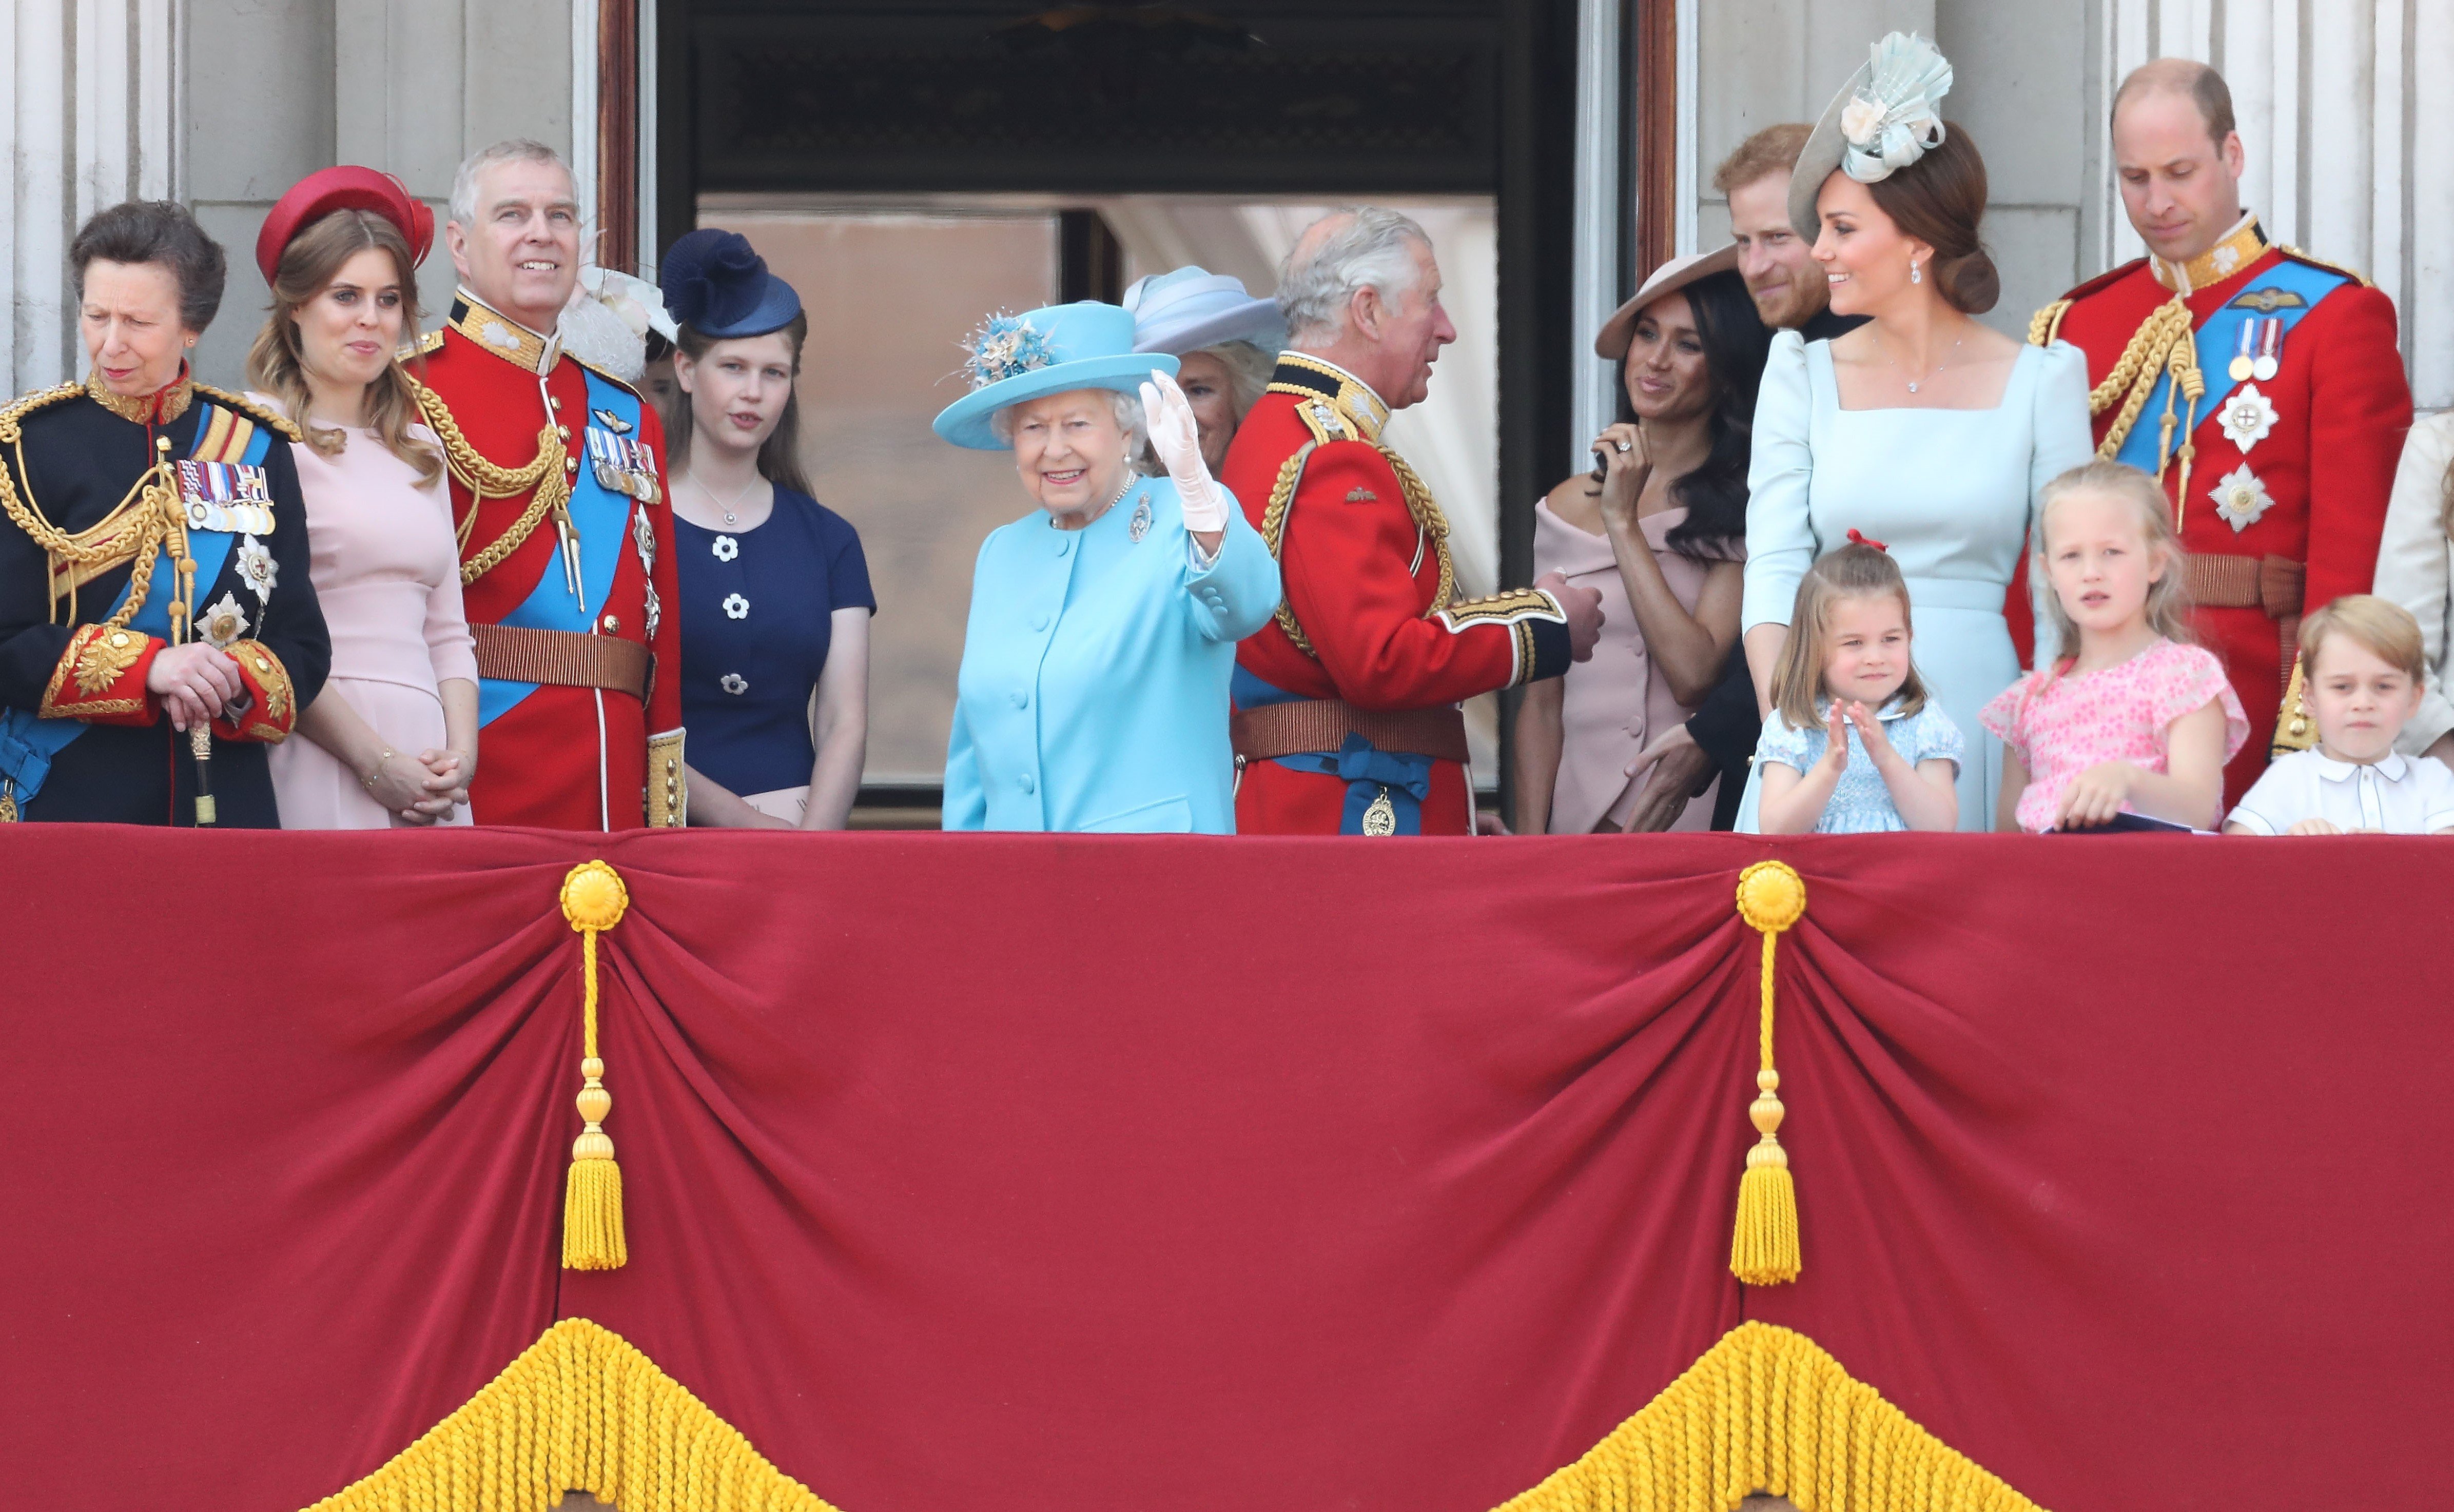 Members of royal family, including Queen Elizabeth II, watch a flypast on the balcony of Buckingham Palace during Trooping The Colour in 2018.